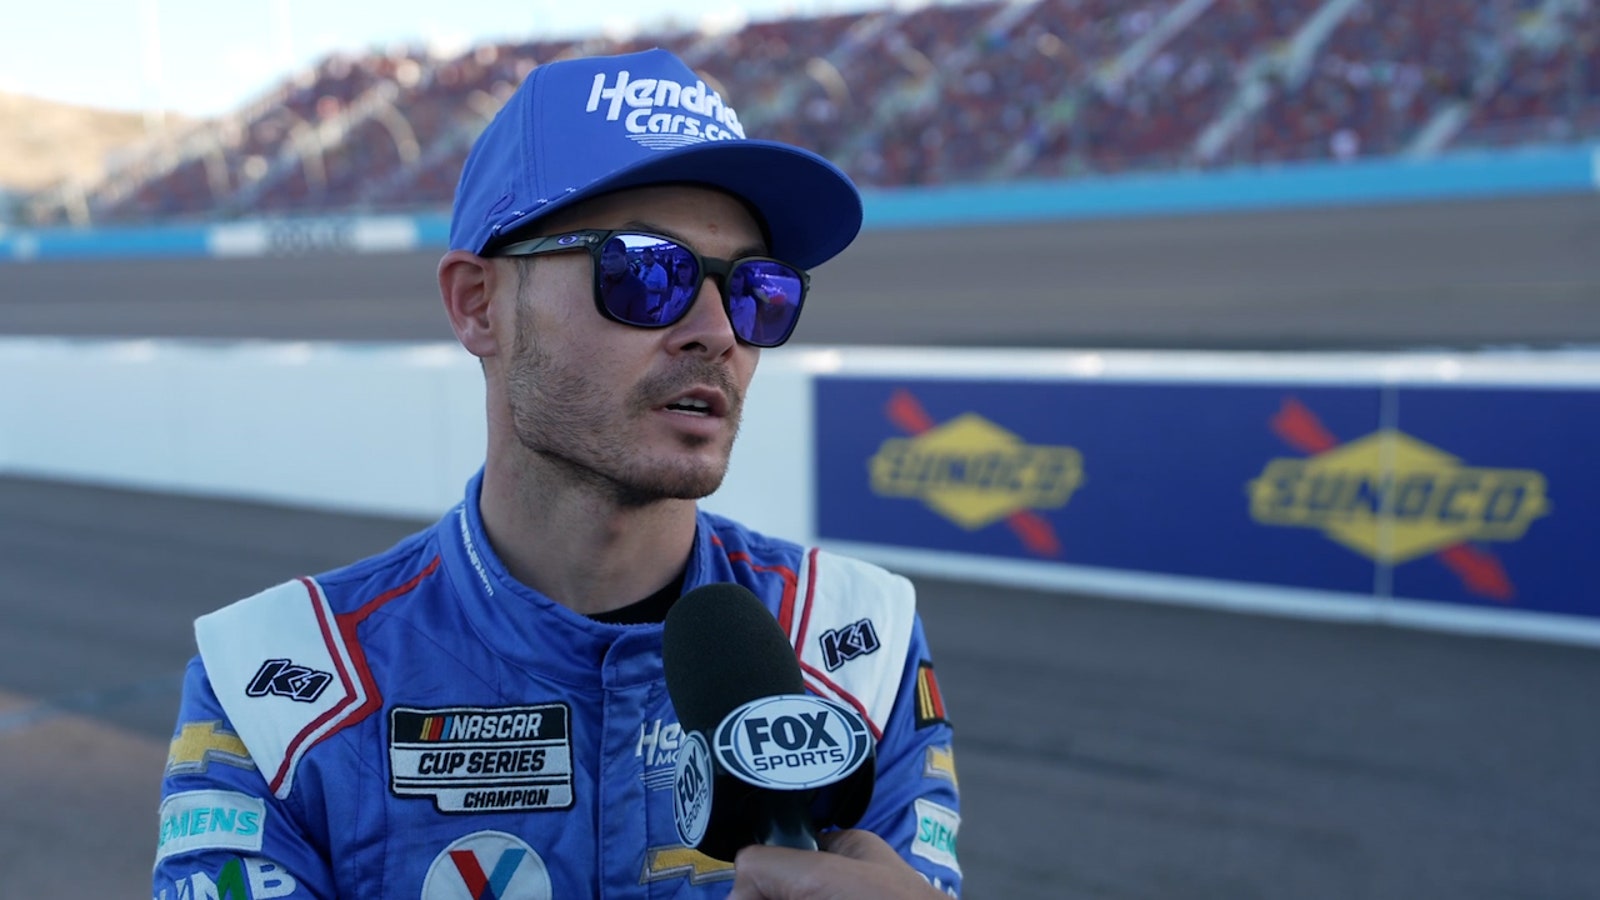 Kyle Larson on finishing second in the standings and thoughts on Ryan Blaney's title